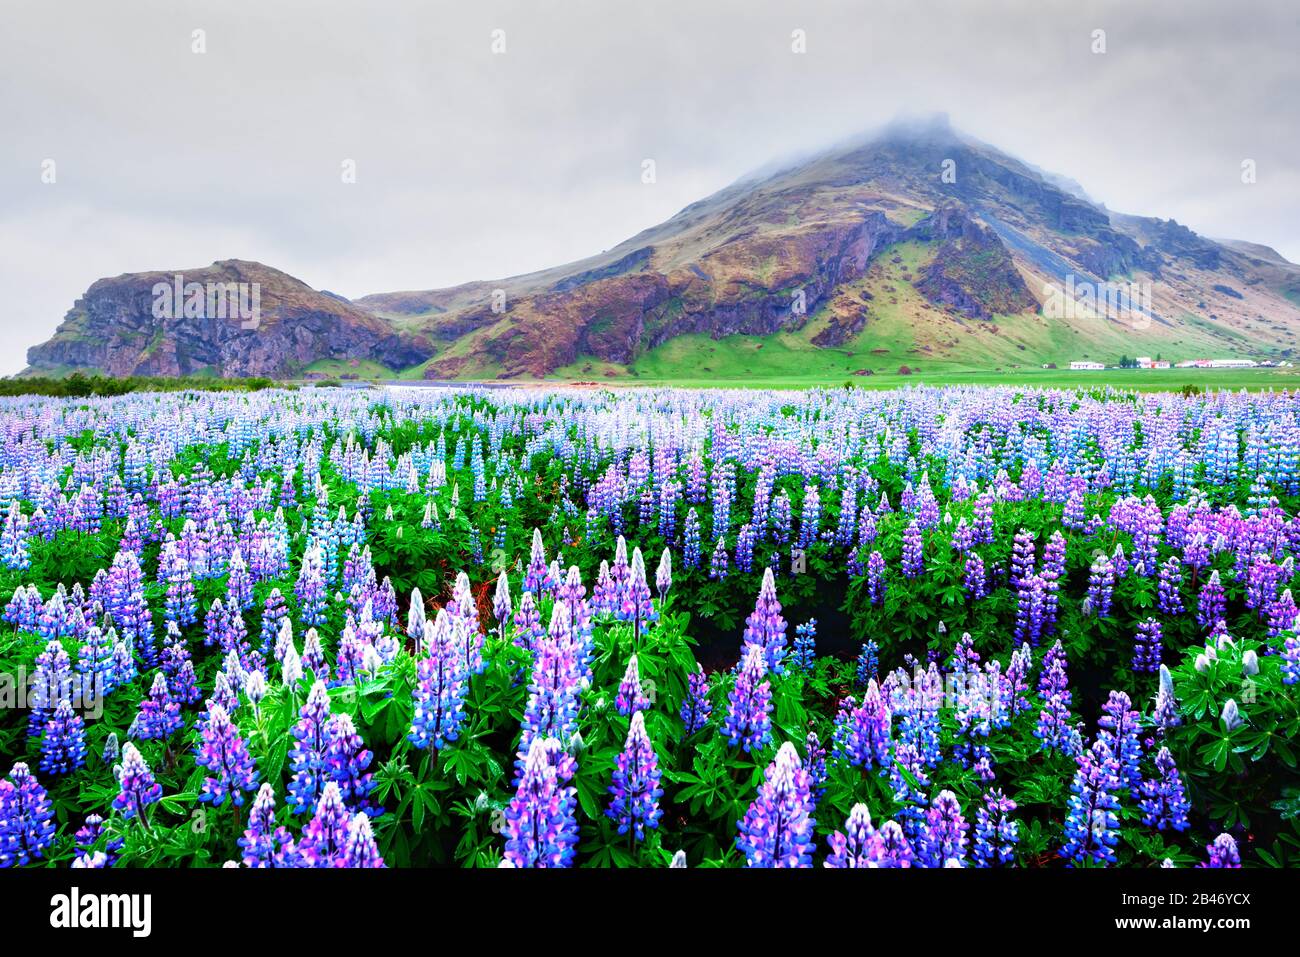 Incredible landscape with mountain and lupine flowers field, Iceland, Europe Stock Photo